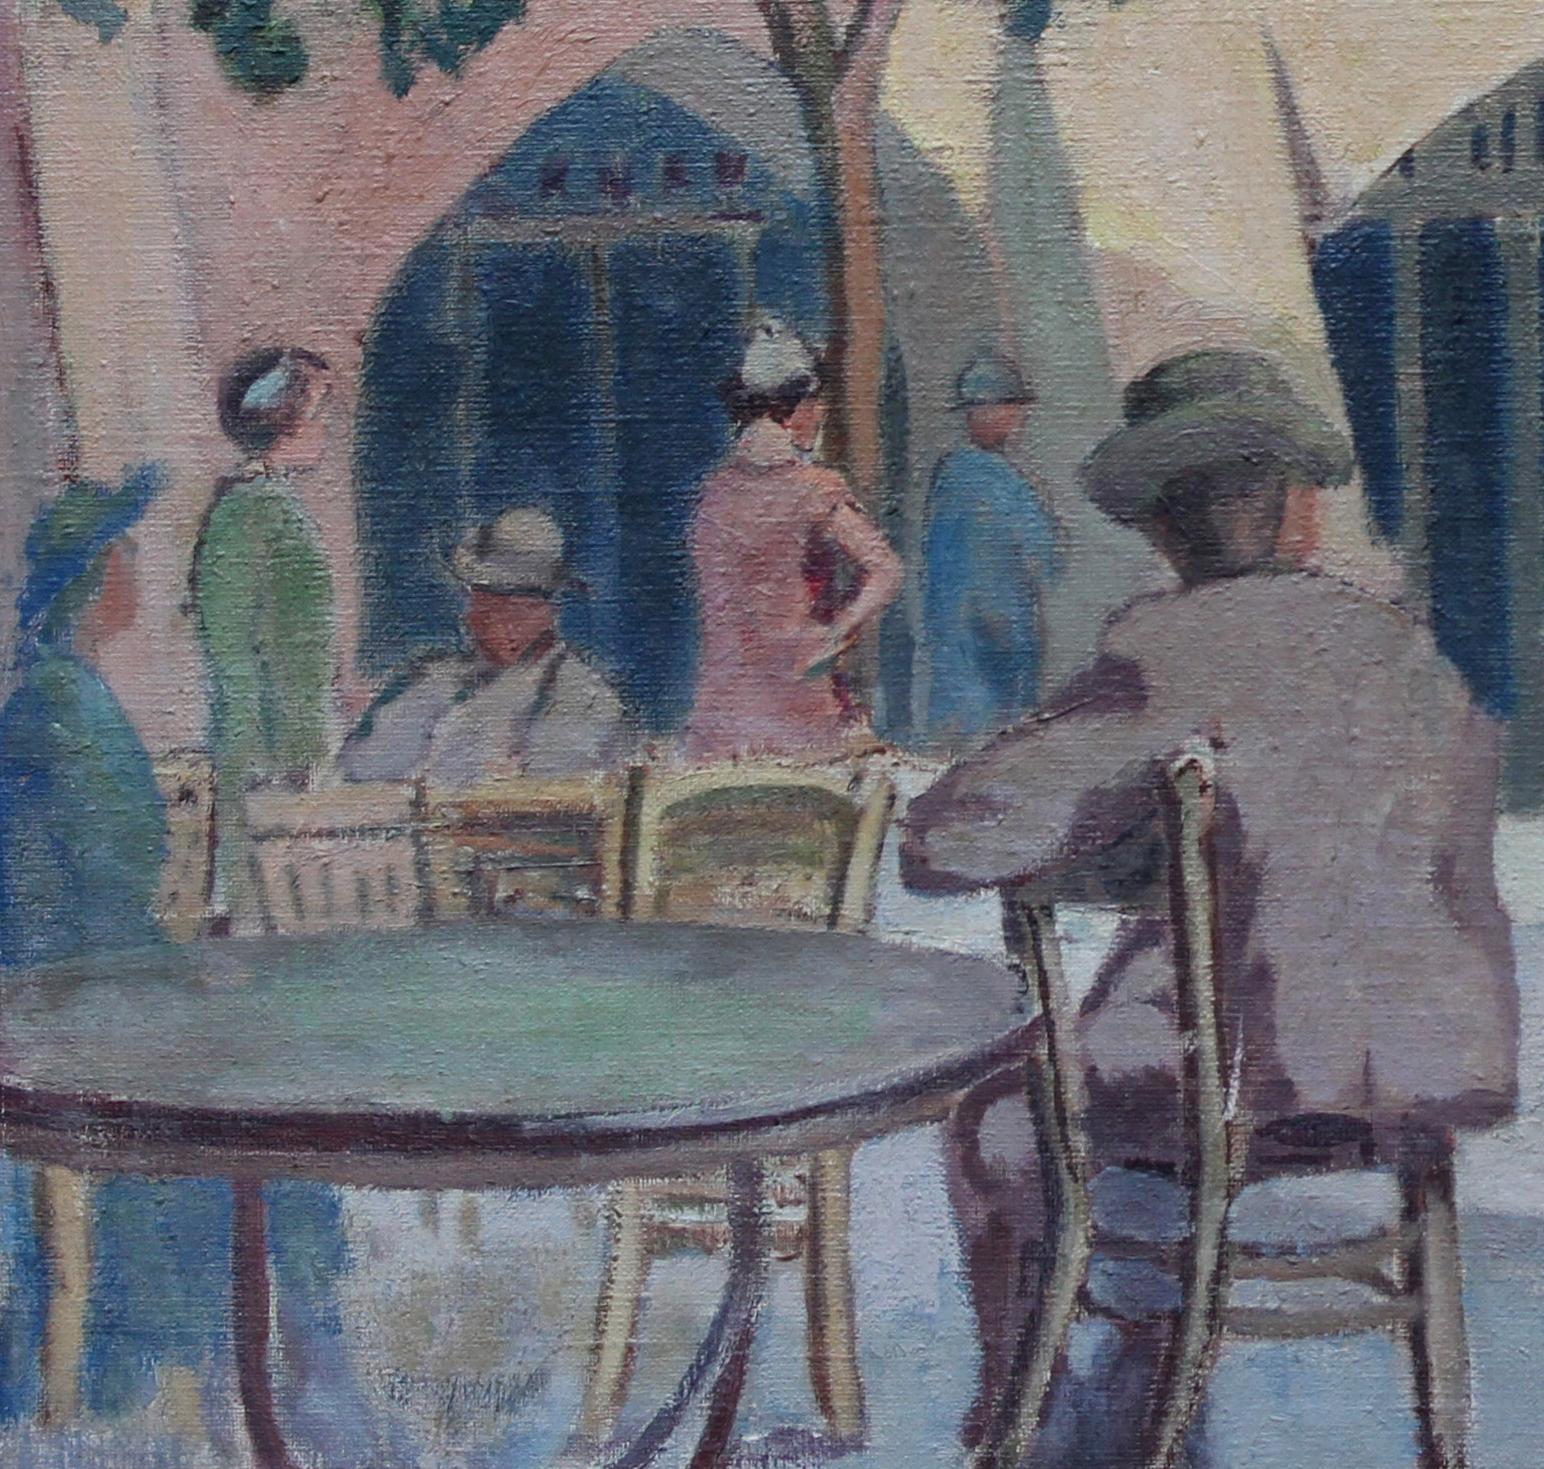 A superb oil on canvas Post Impressionist work by British artist Forrest Hewit. This vibrant work depicts an external café scene under trees, with a dozen figures seated or standing at tables. It dates to circa 1930. One can feel the summer heat in